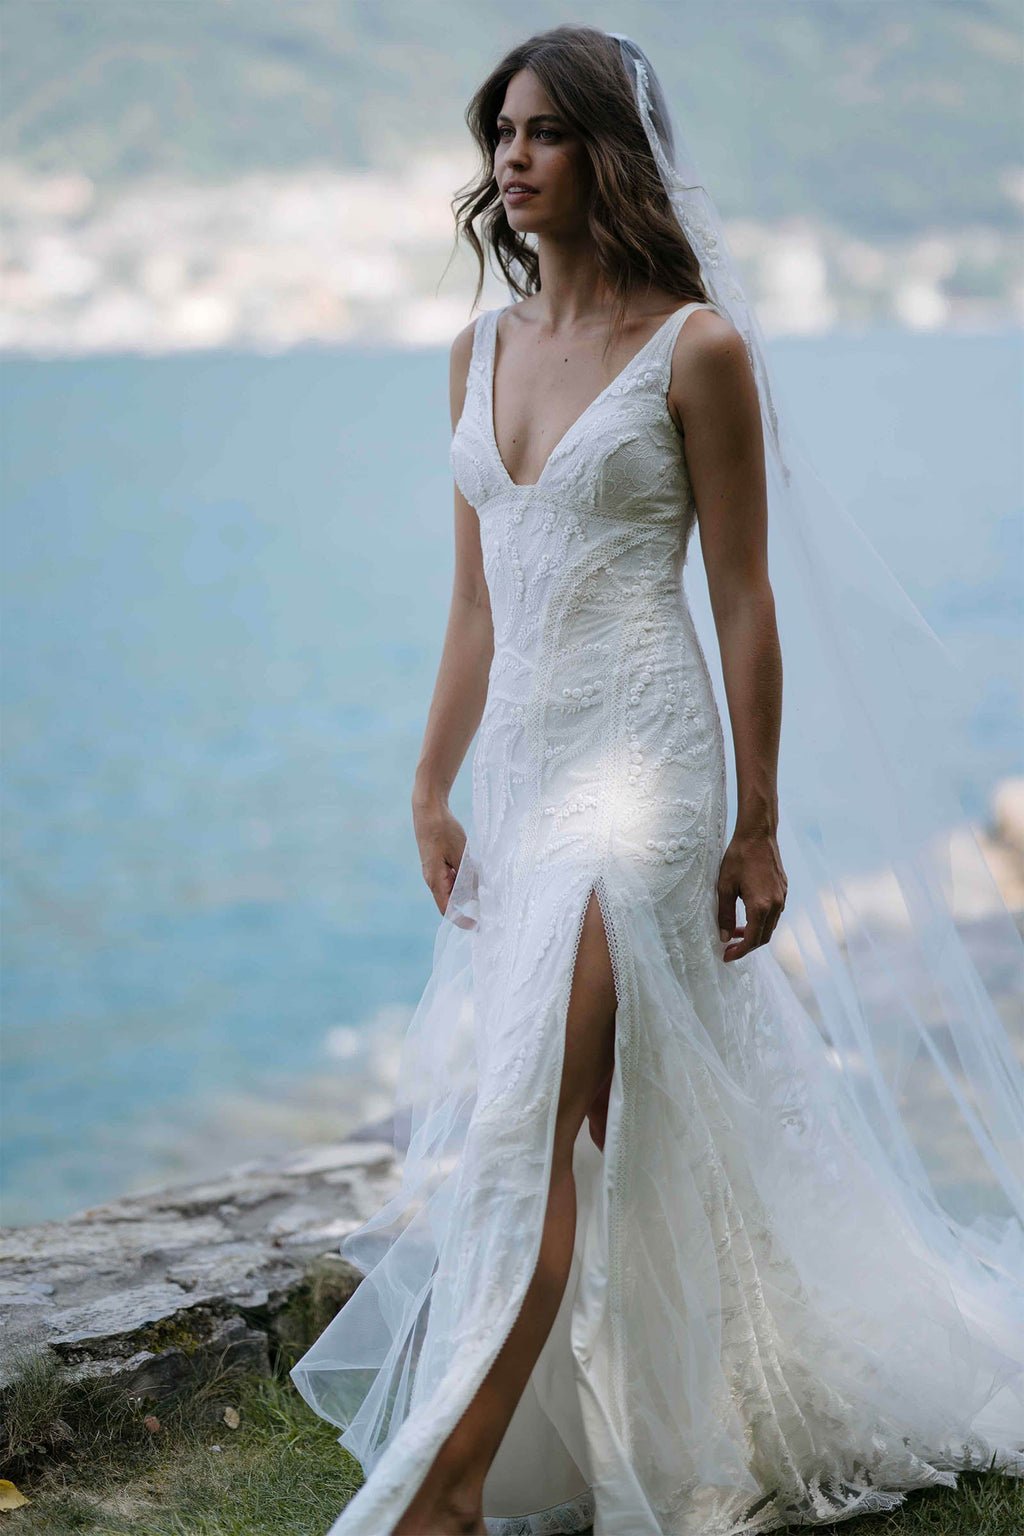 Model in Solstice gown and veil walking along grass with italian coastal line in background